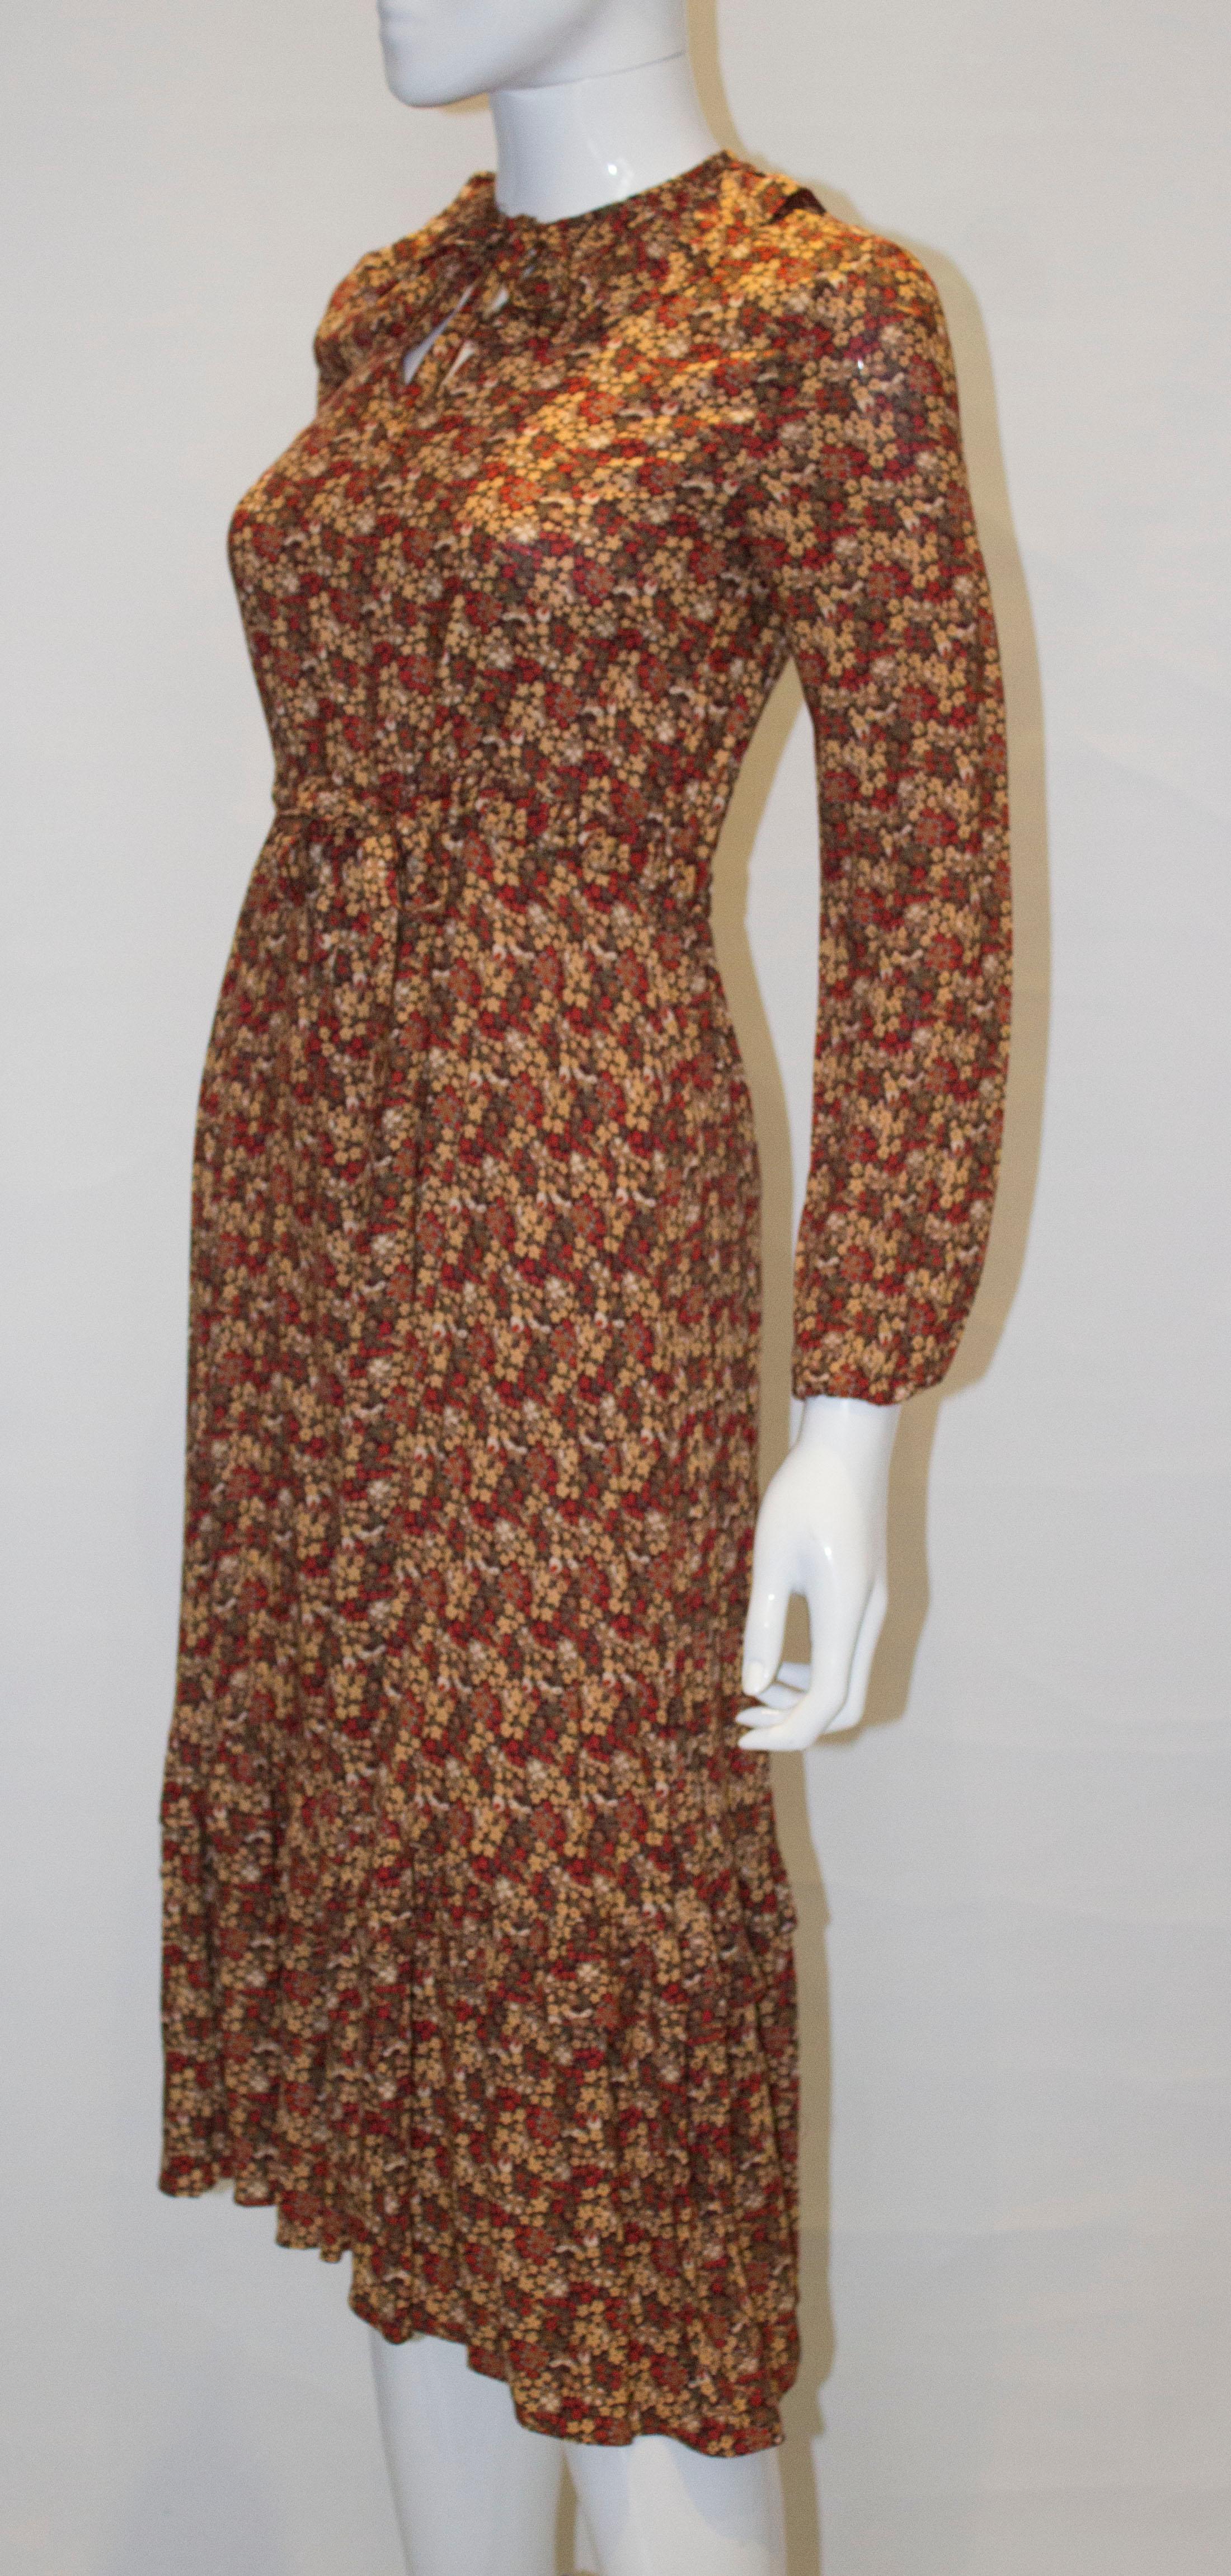 Vintage 1970s Floral Print Dress with Frill Collar In Good Condition For Sale In London, GB